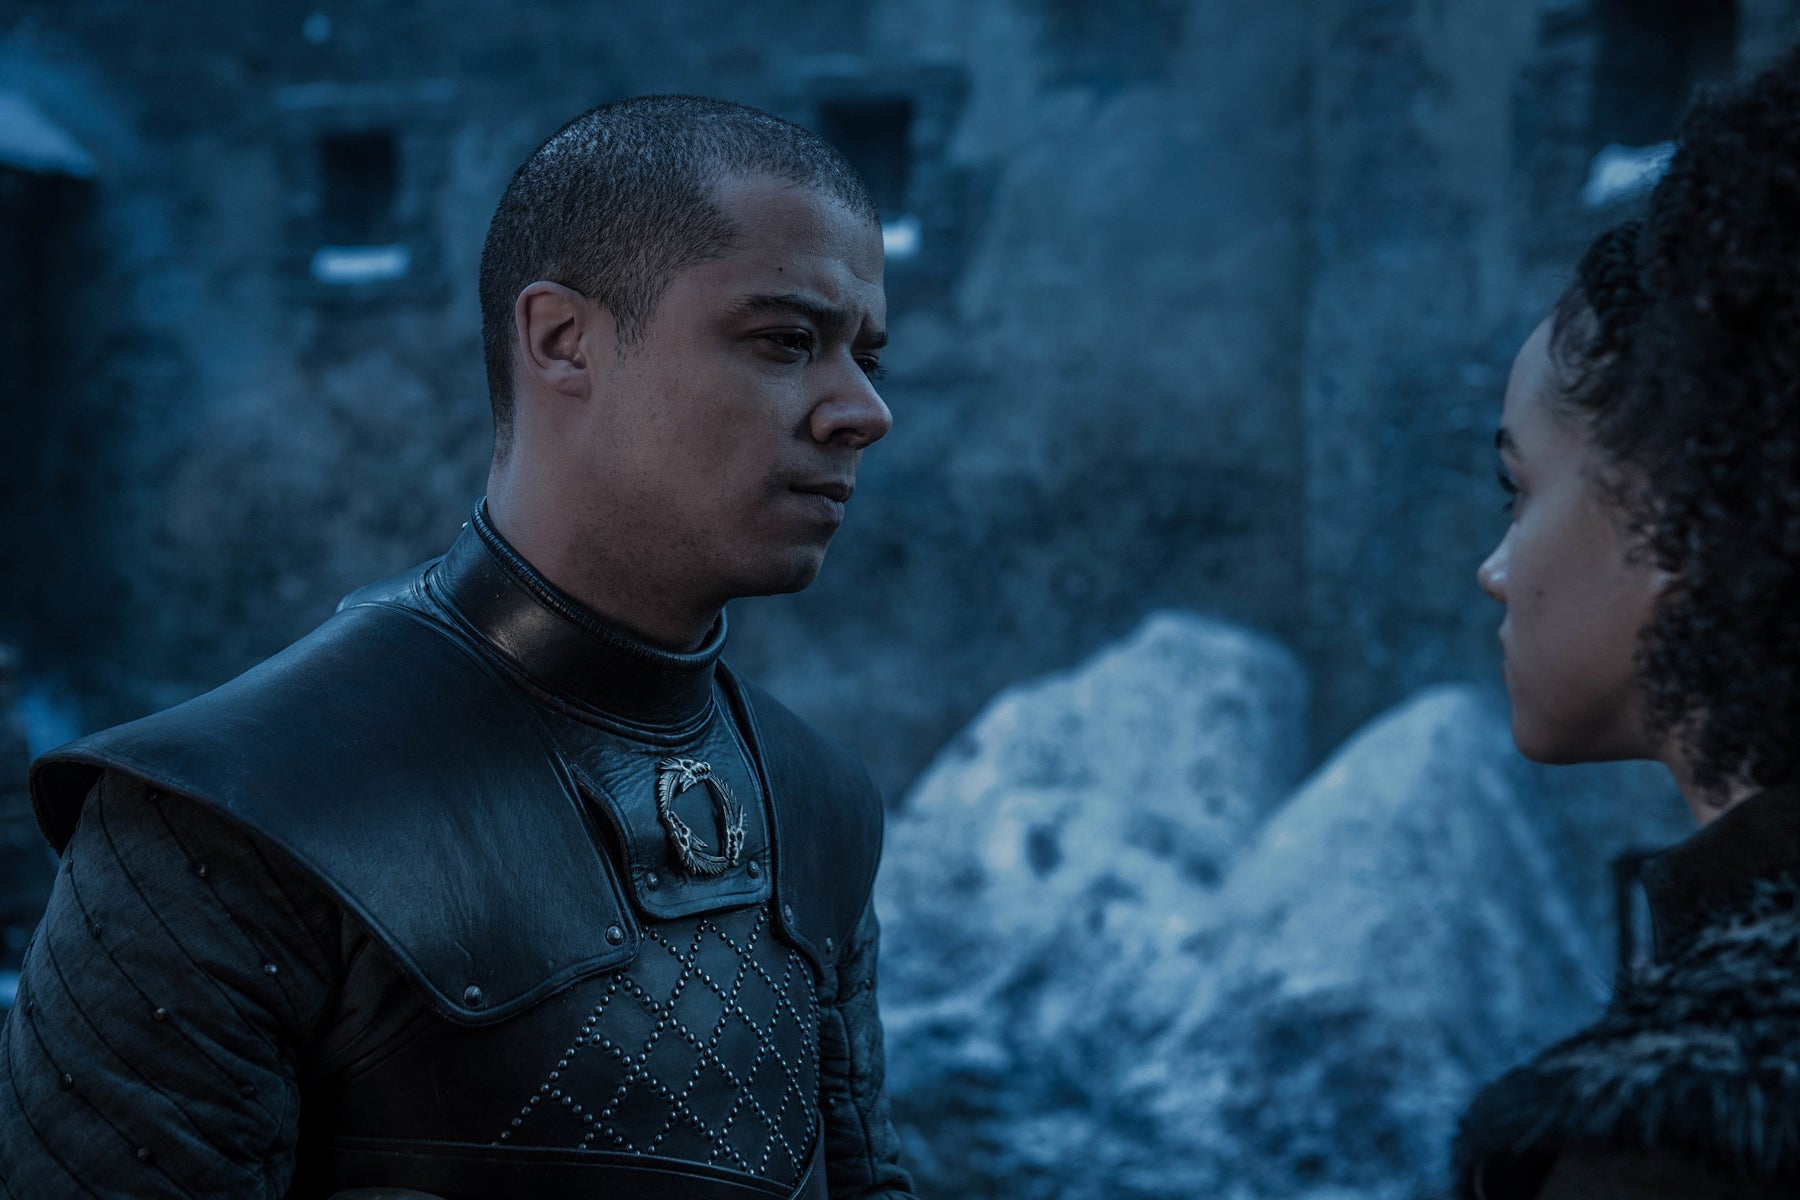 Grey Worm and Missandei stand close to each other in the courtyard of Winterfell.